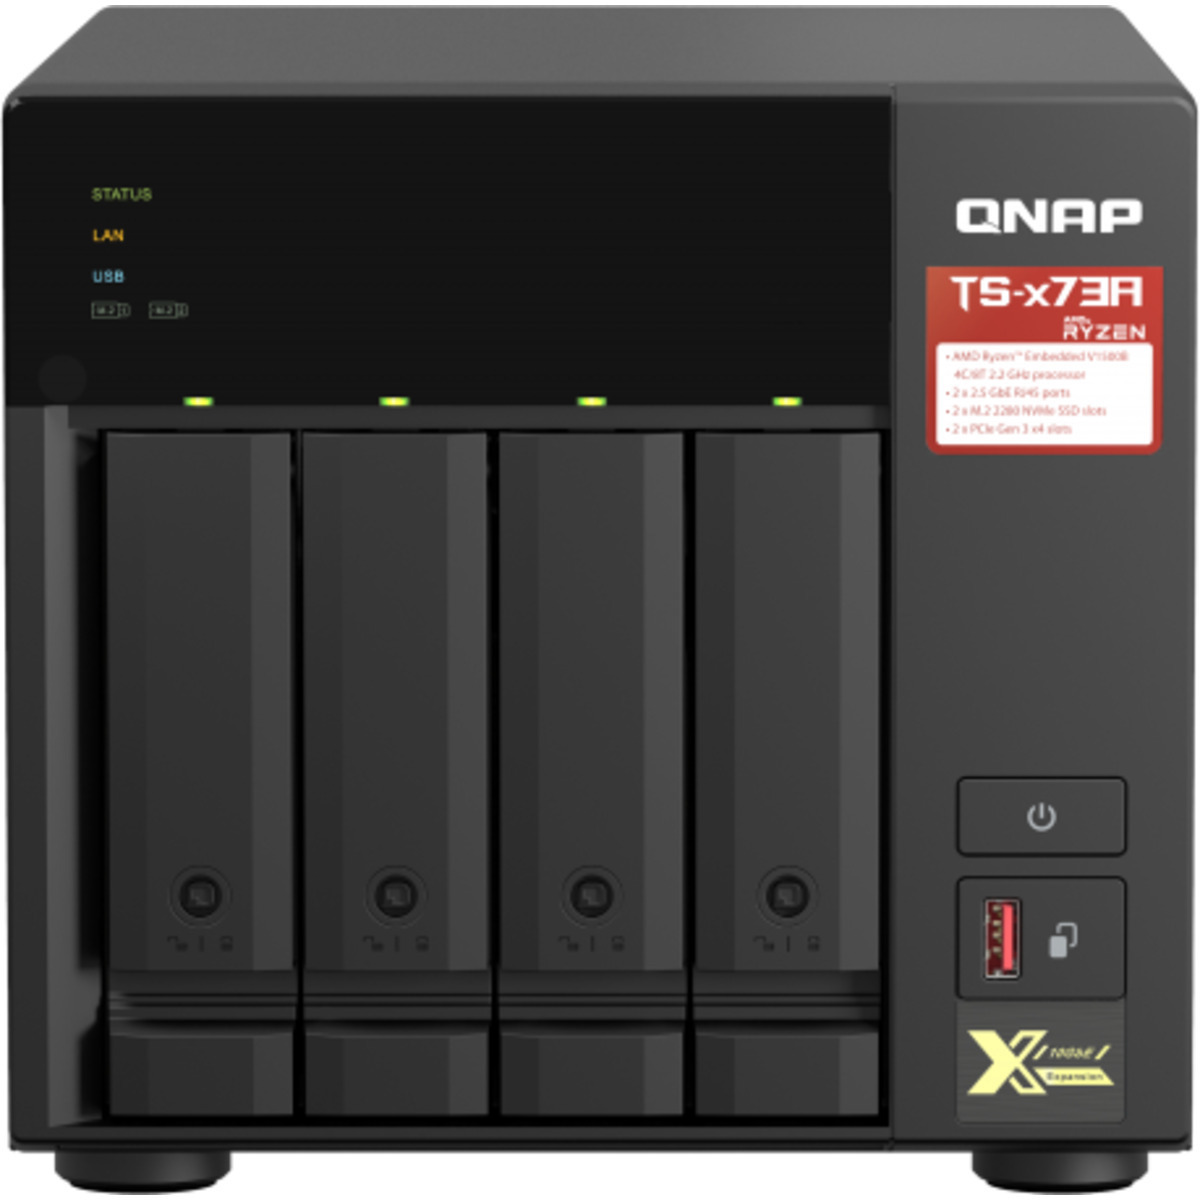 QNAP TS-473A 8tb 4-Bay Desktop Multimedia / Power User / Business NAS - Network Attached Storage Device 4x2tb Sandisk Ultra 3D SDSSDH3-2T00 2.5 560/520MB/s SATA 6Gb/s SSD CONSUMER Class Drives Installed - Burn-In Tested TS-473A